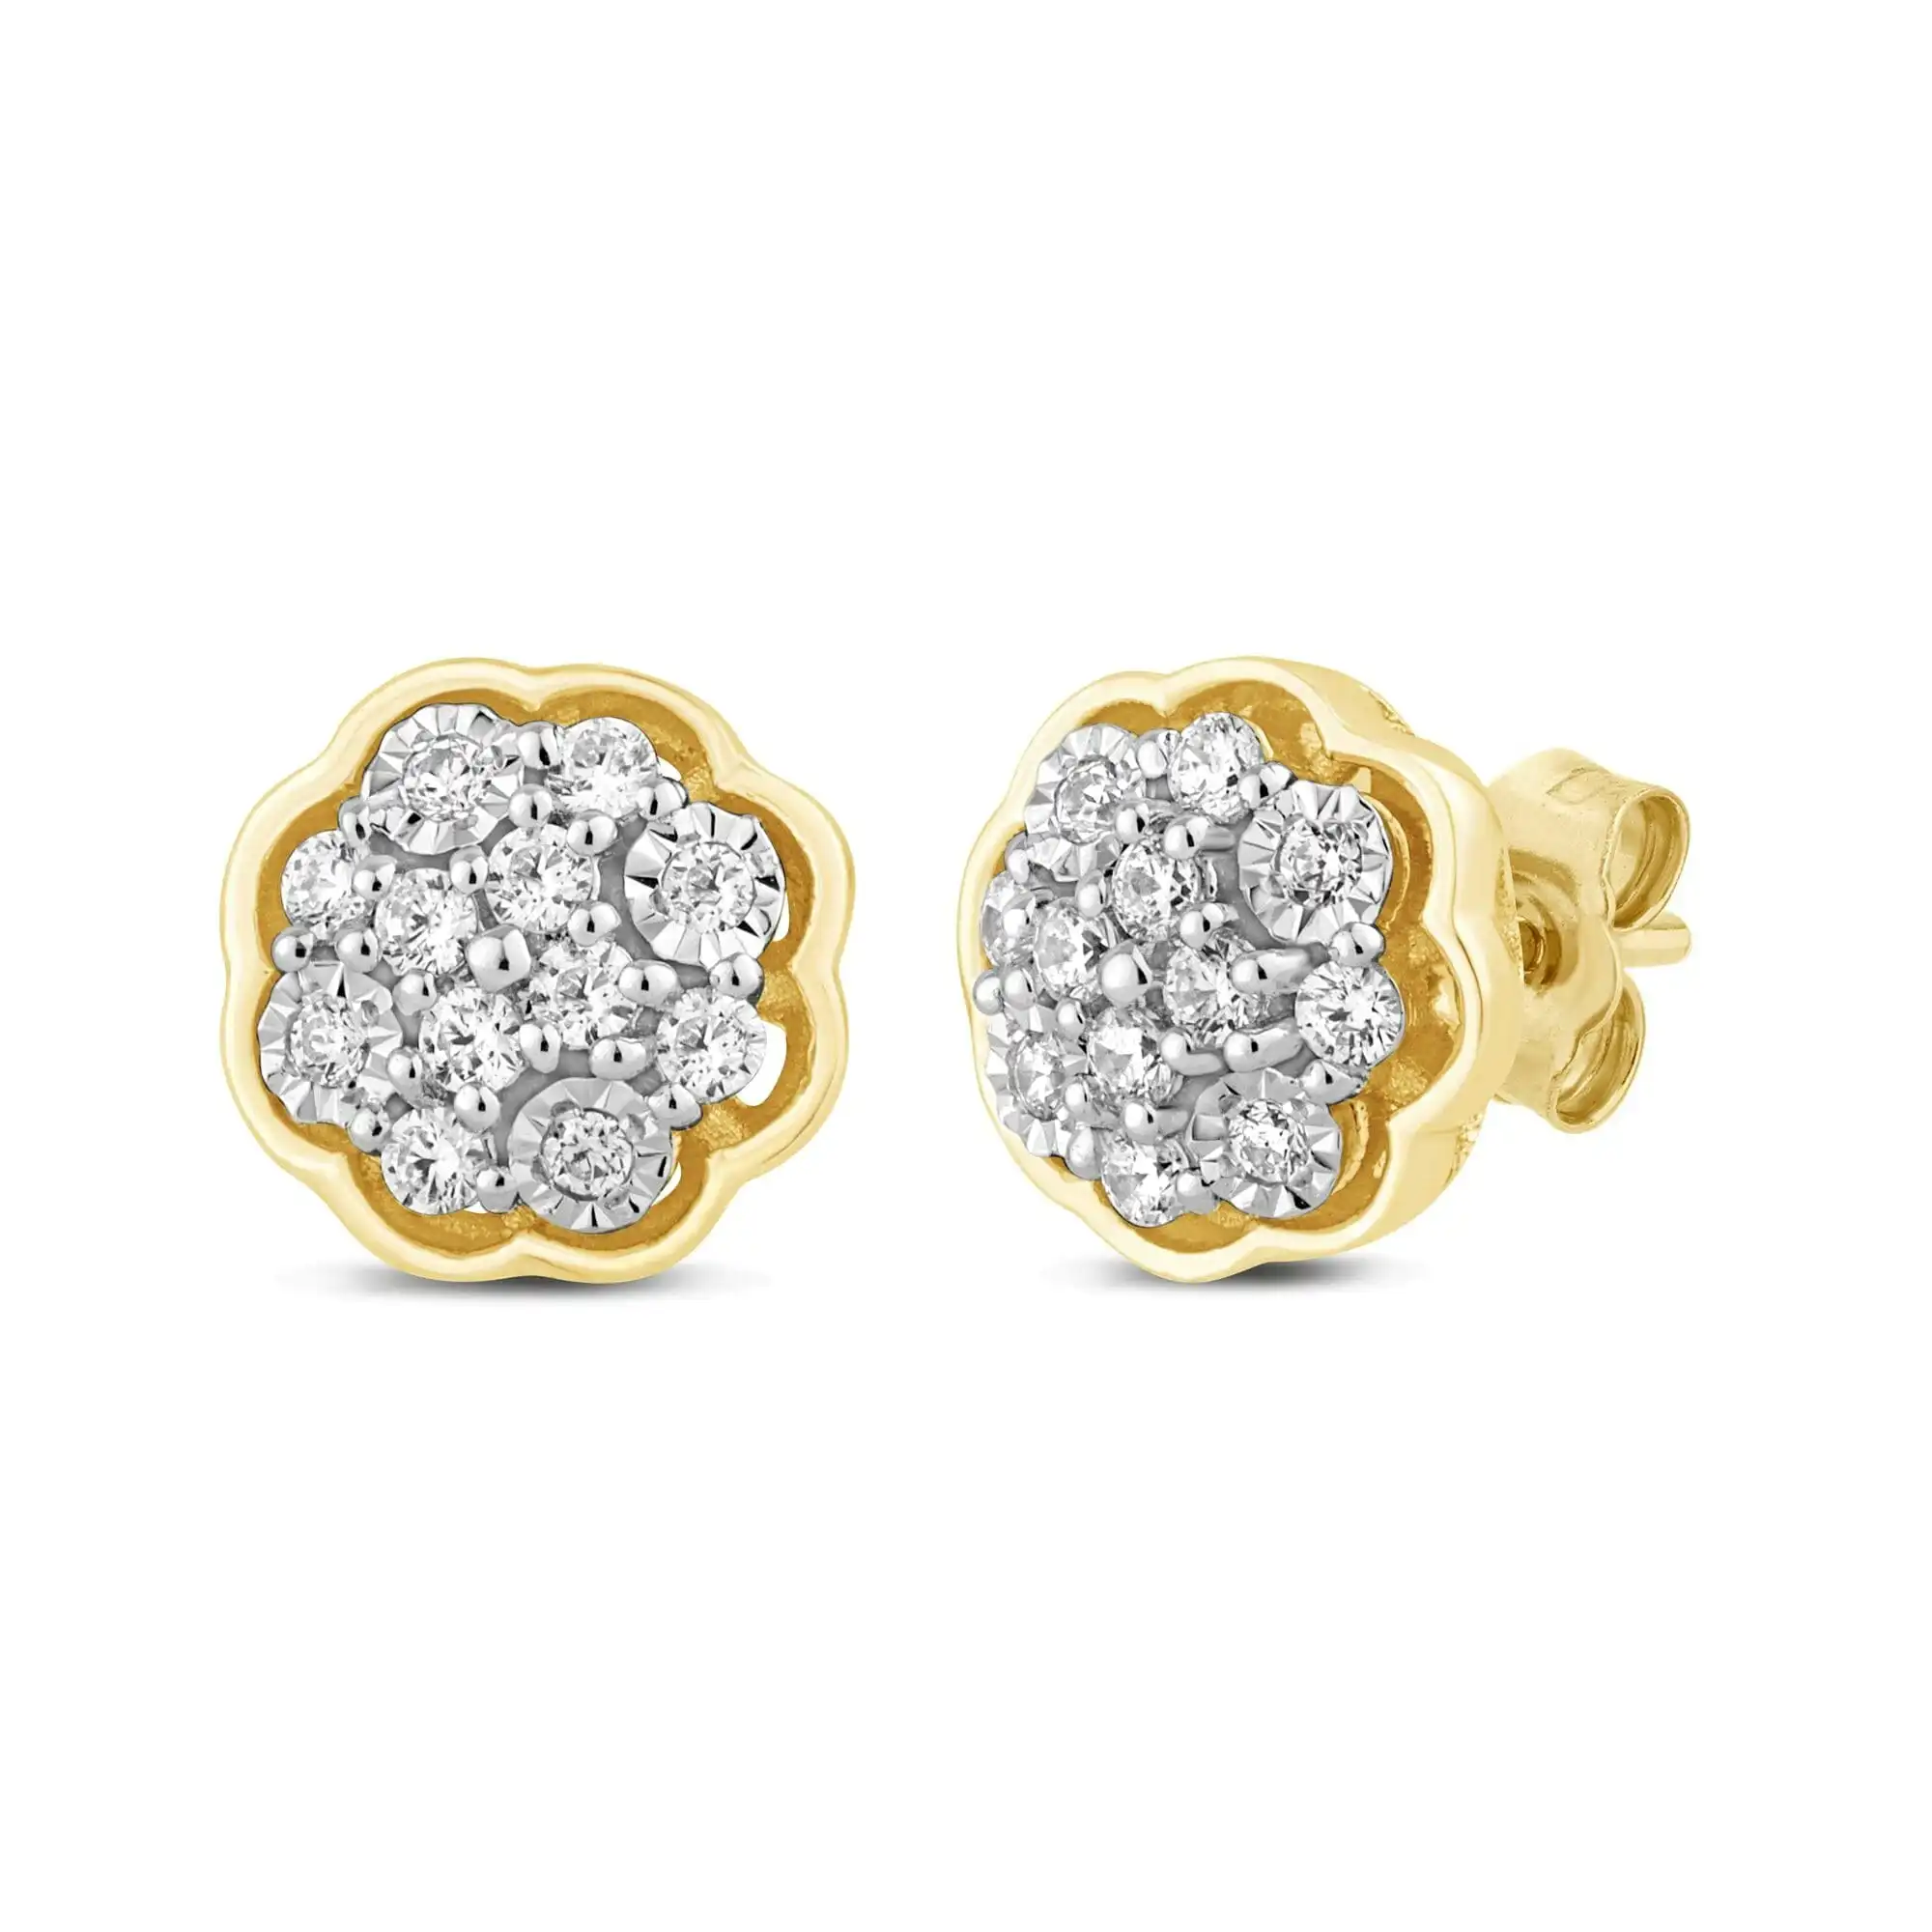 Flower Stud Earrings with 0.10ct of Diamonds in 9ct Yellow Gold